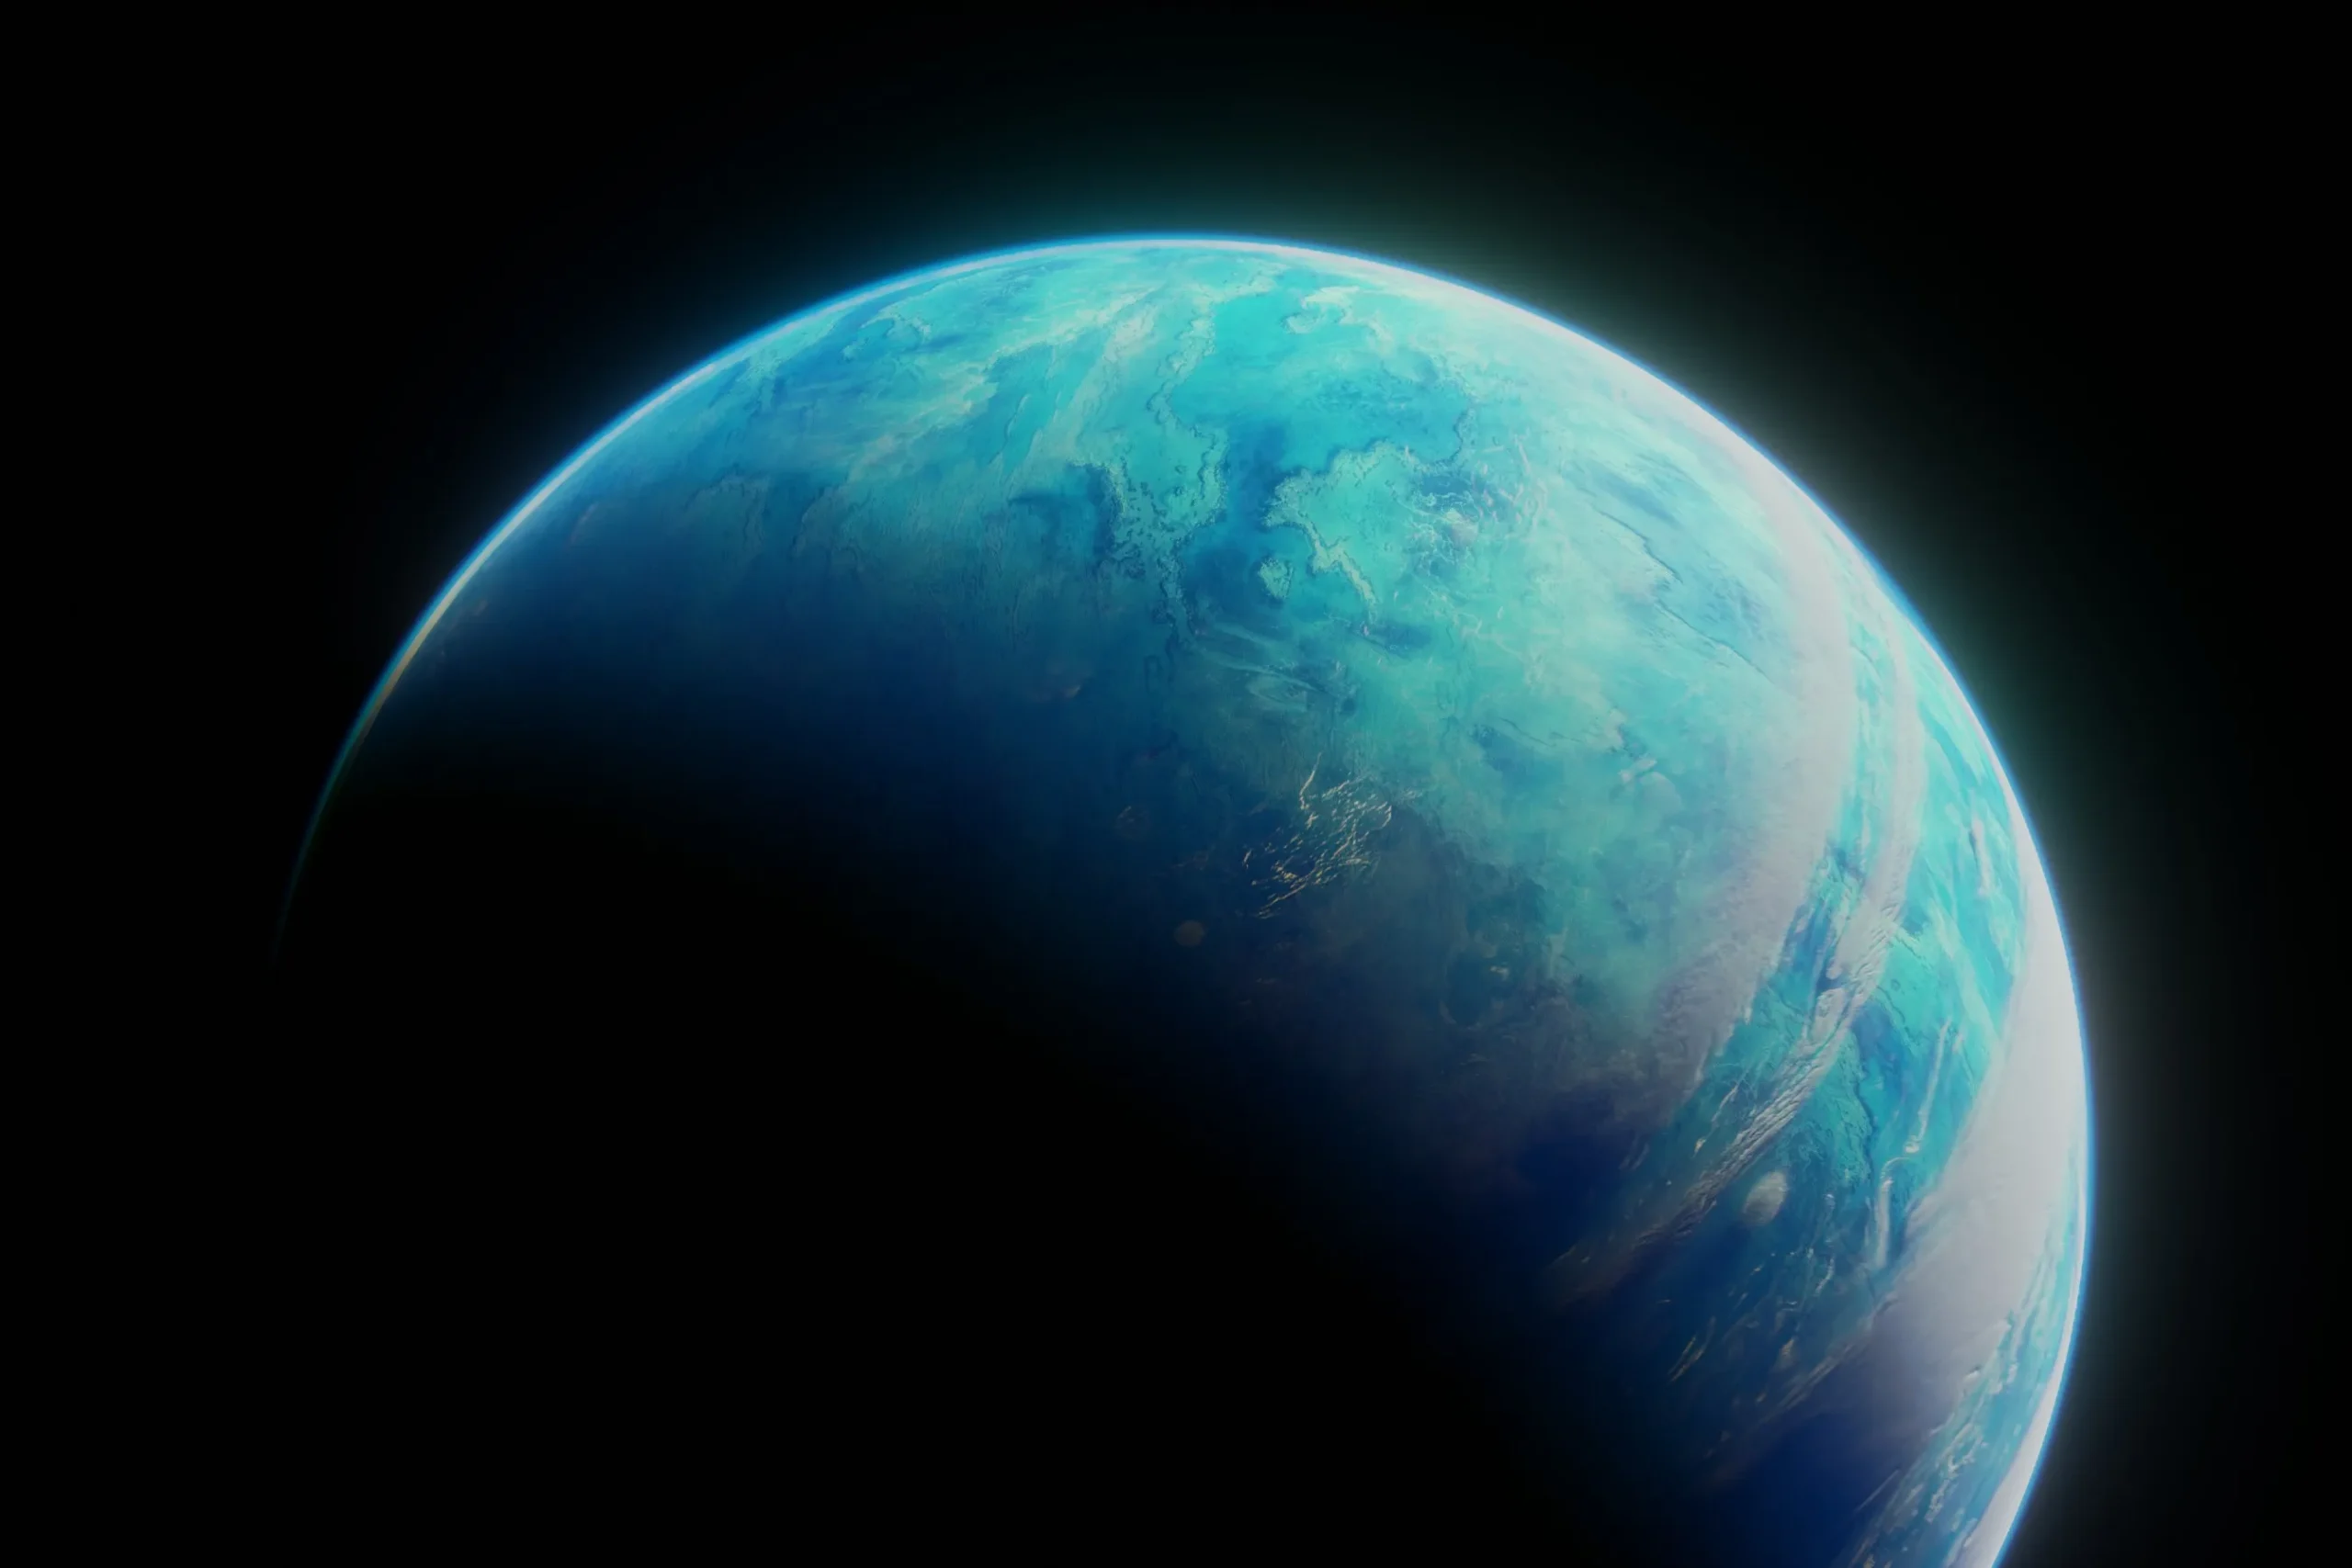 A blue planet in space, possibly one of the TOI-700 planets.